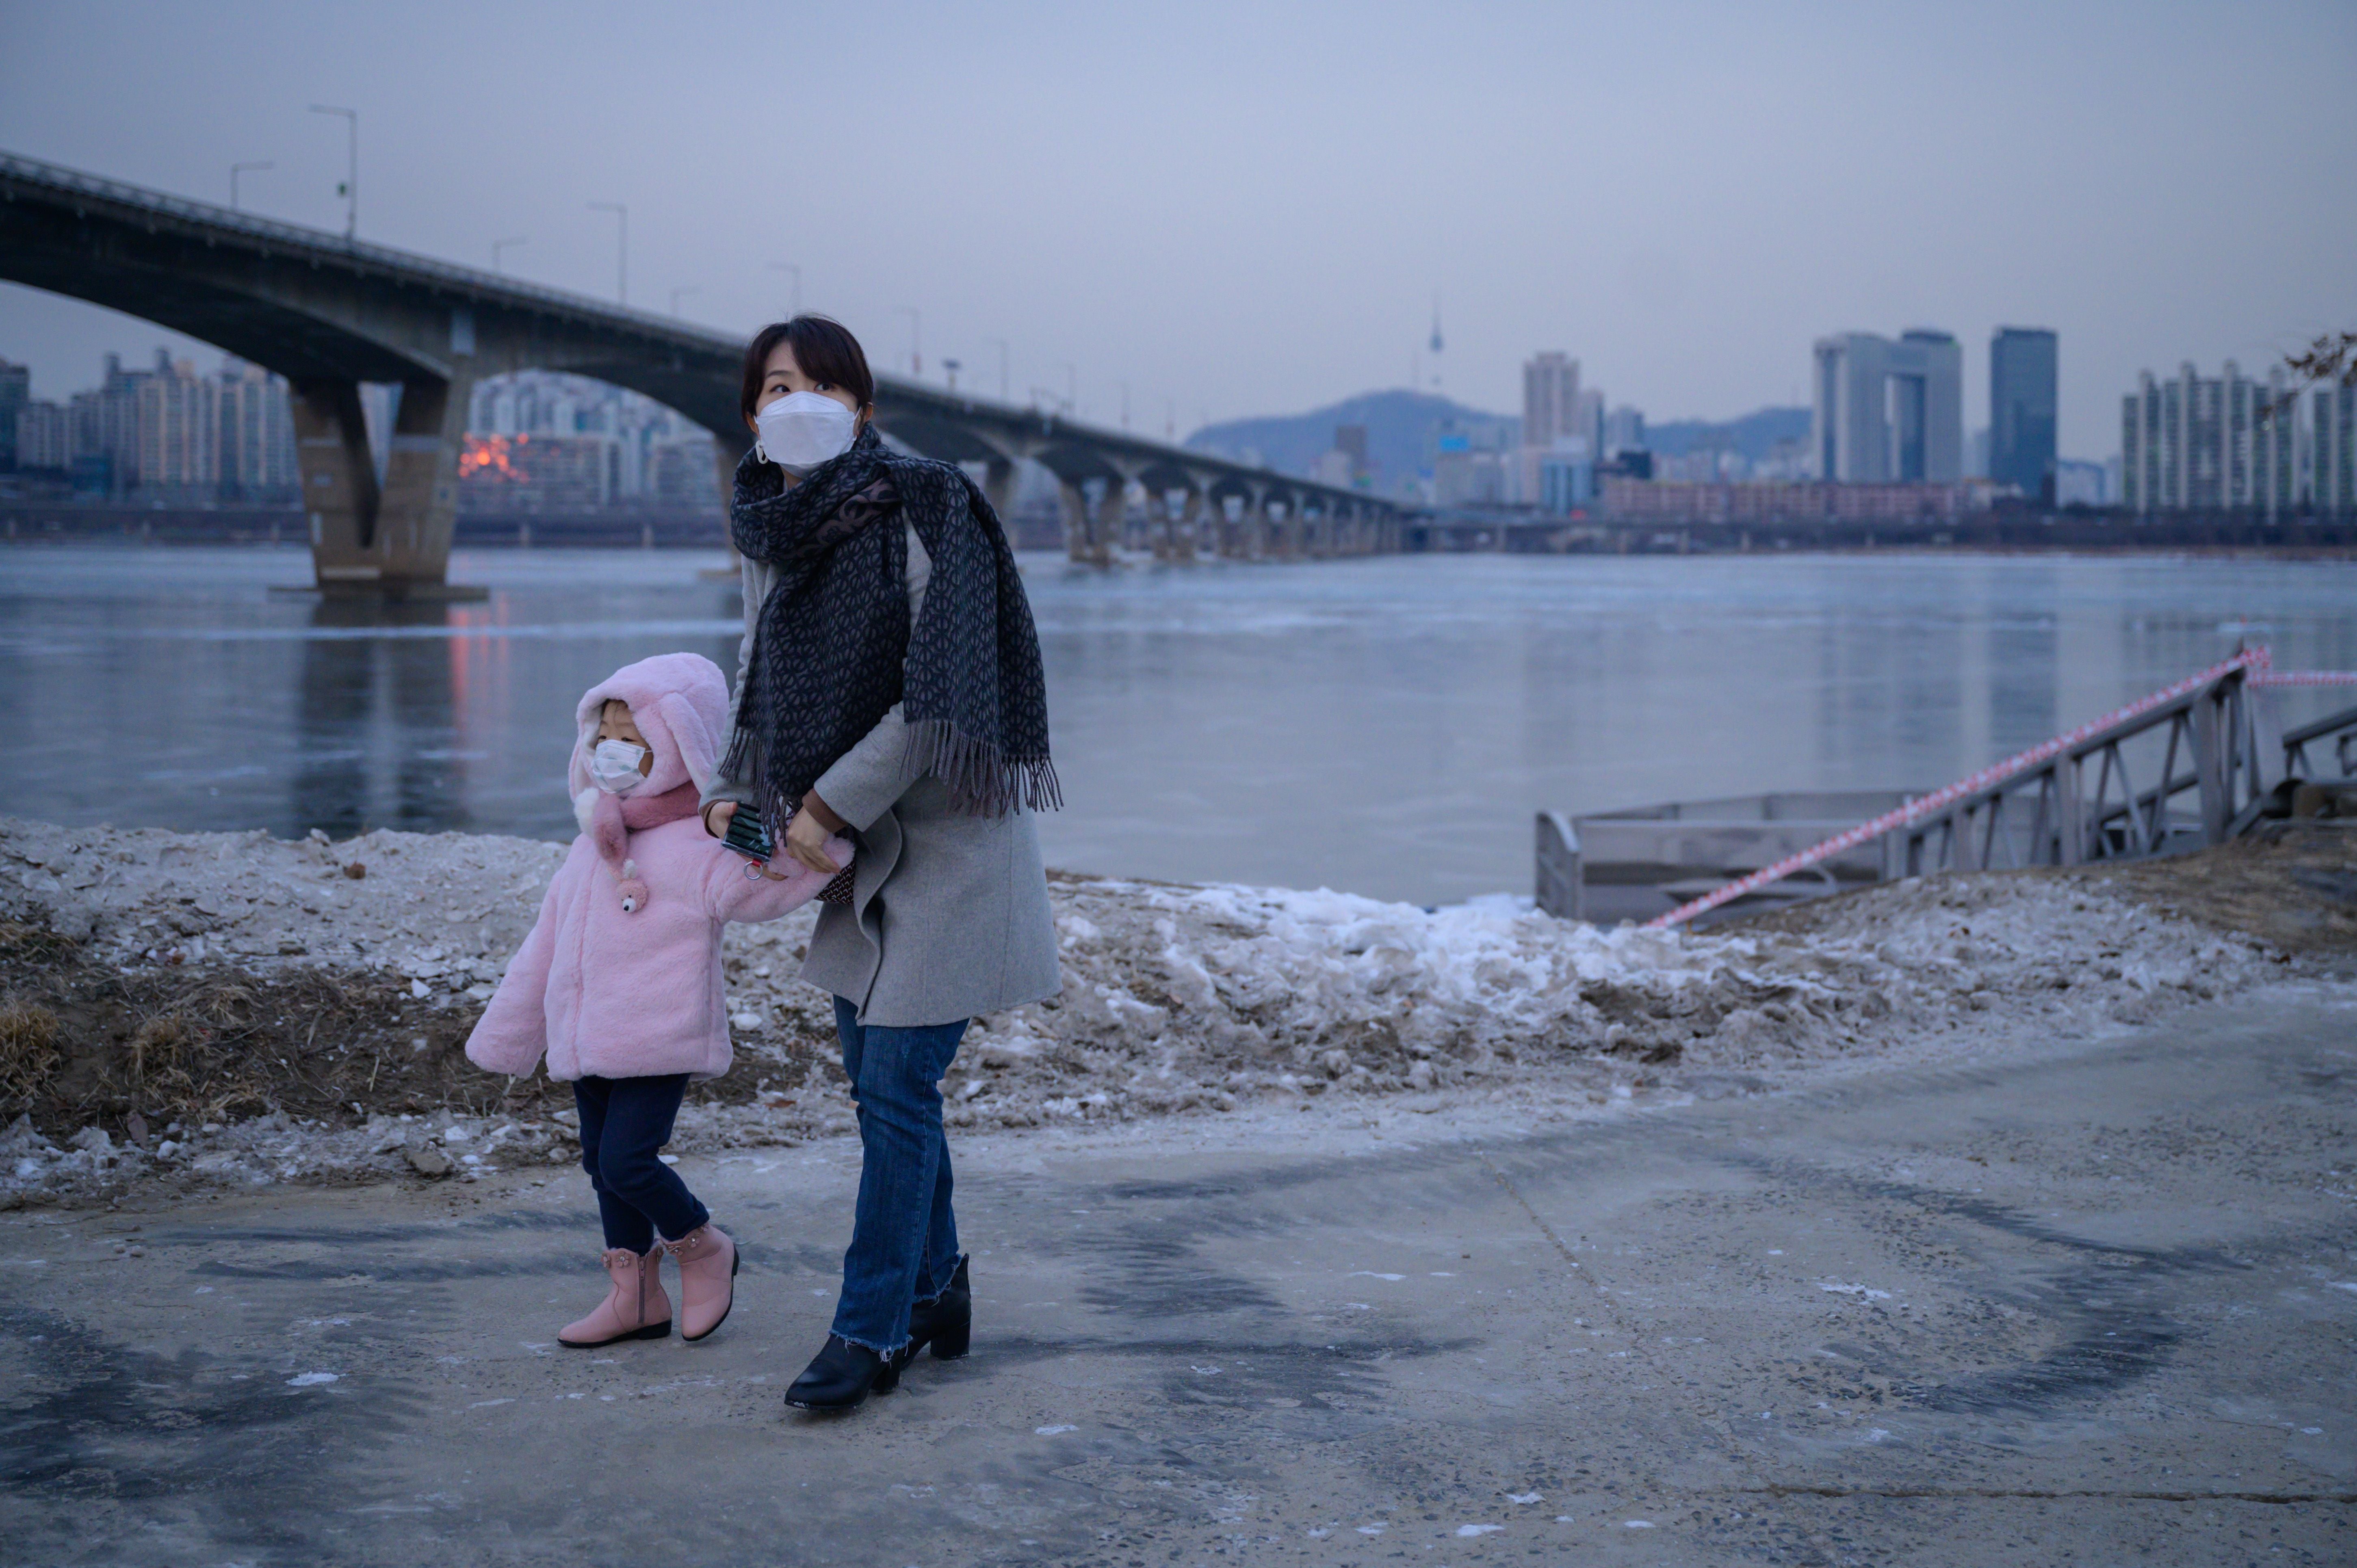 A photo taken on 10 January 2021 shows a woman and child standing before the frozen Han river and Seoul city skyline.